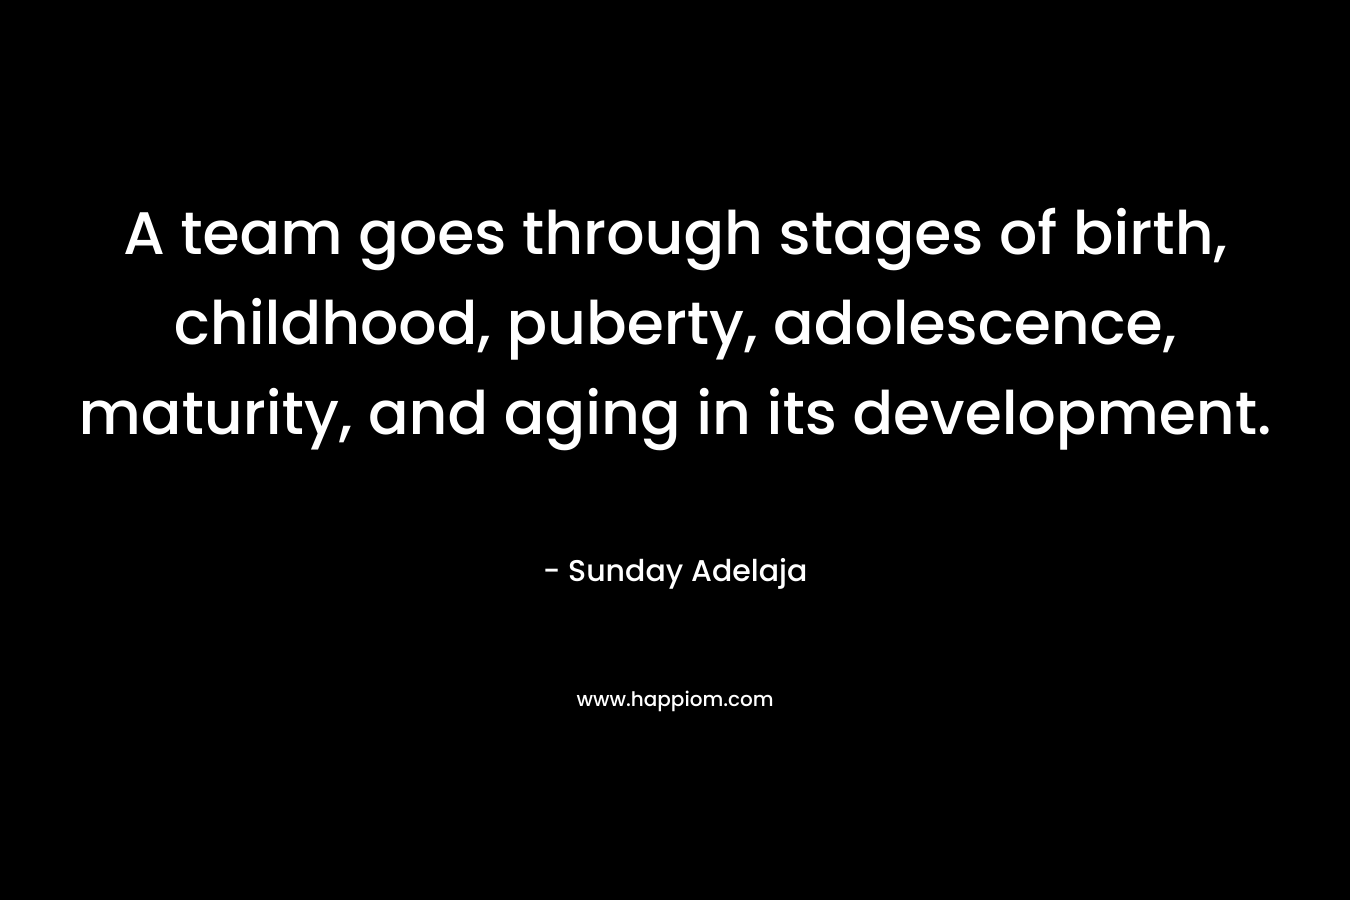 A team goes through stages of birth, childhood, puberty, adolescence, maturity, and aging in its development. – Sunday Adelaja